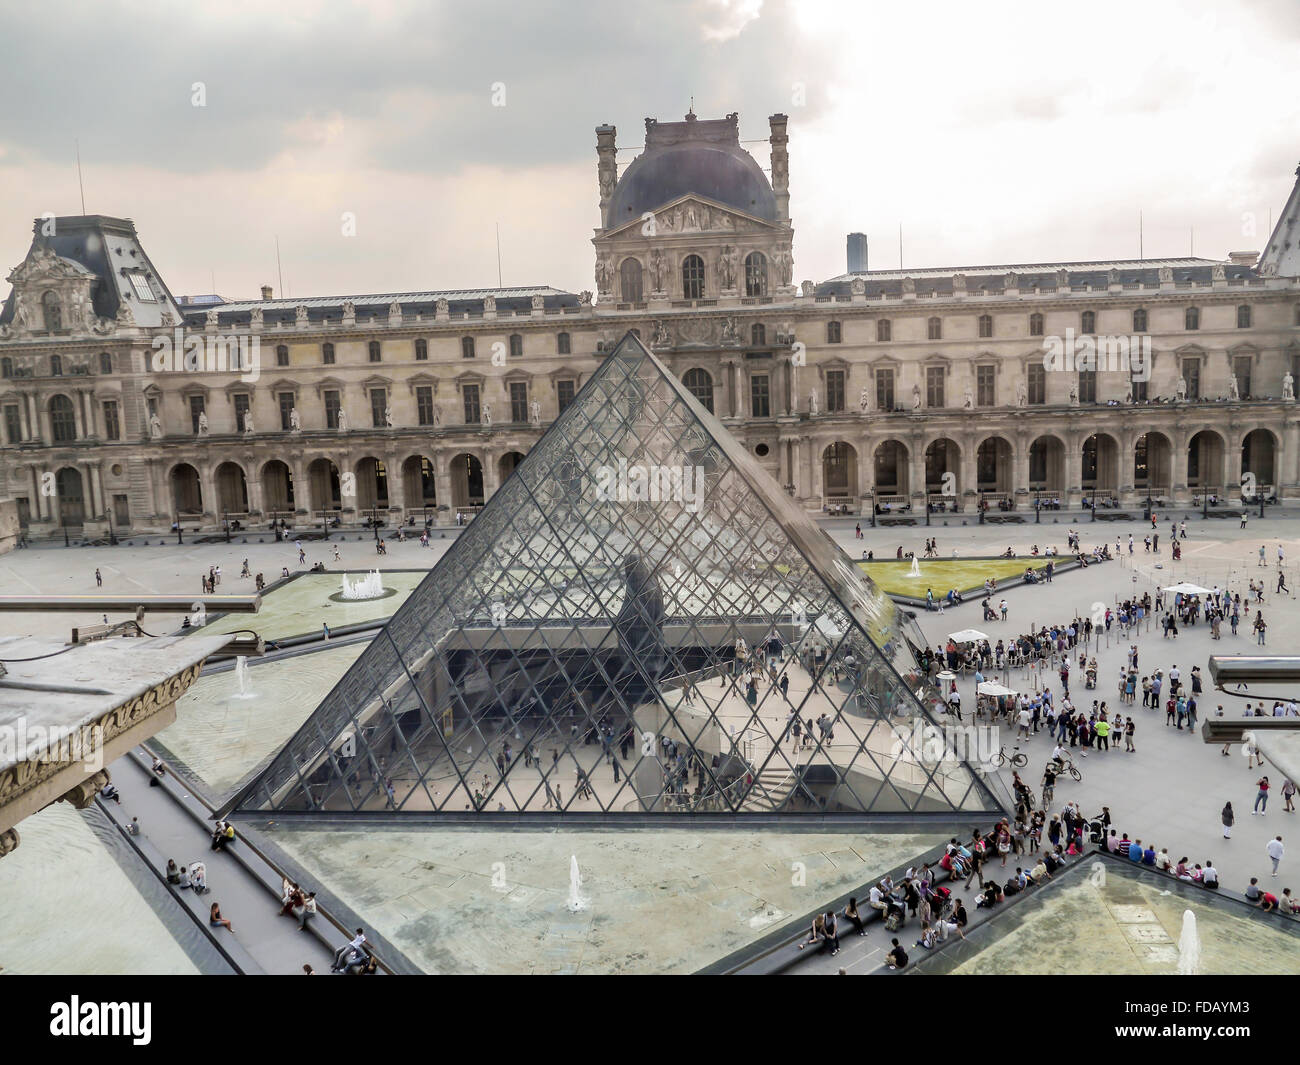 PARIS, FRANCE - AUGUST 28 2013: - The main courtyard of the Louvre Museum with the glass Pyramid Stock Photo